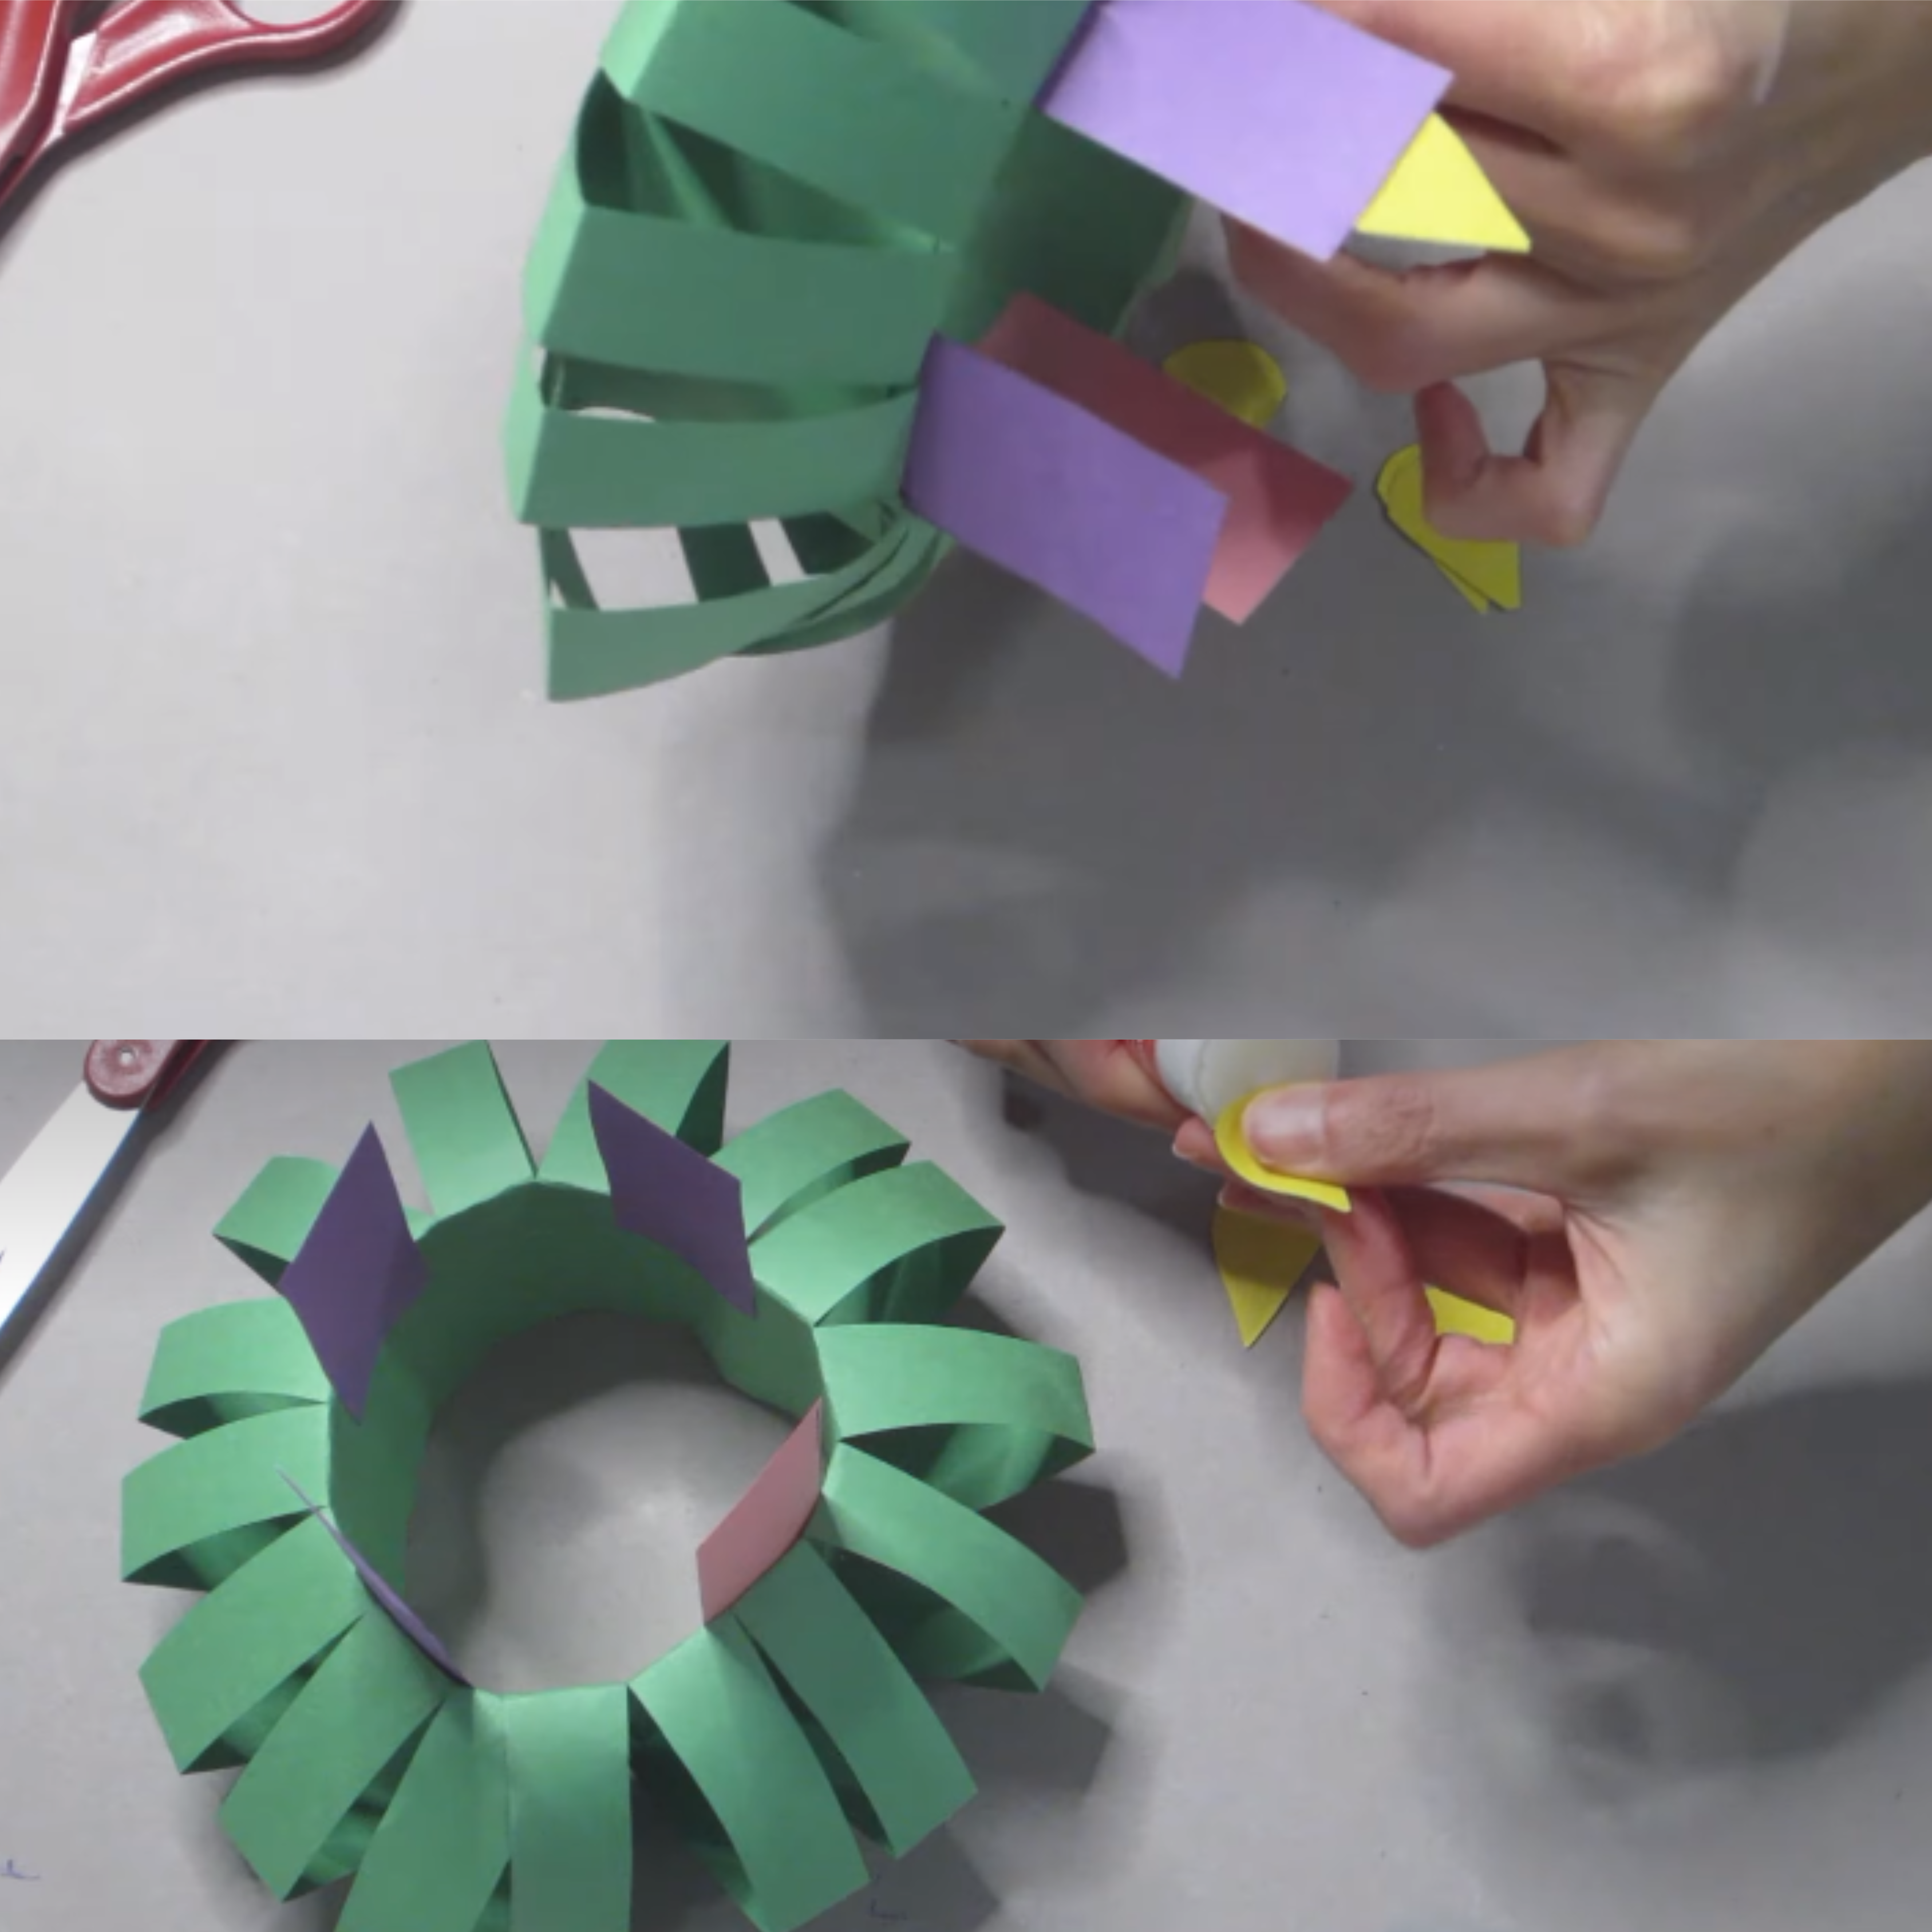 Gluing the paper to the wreath